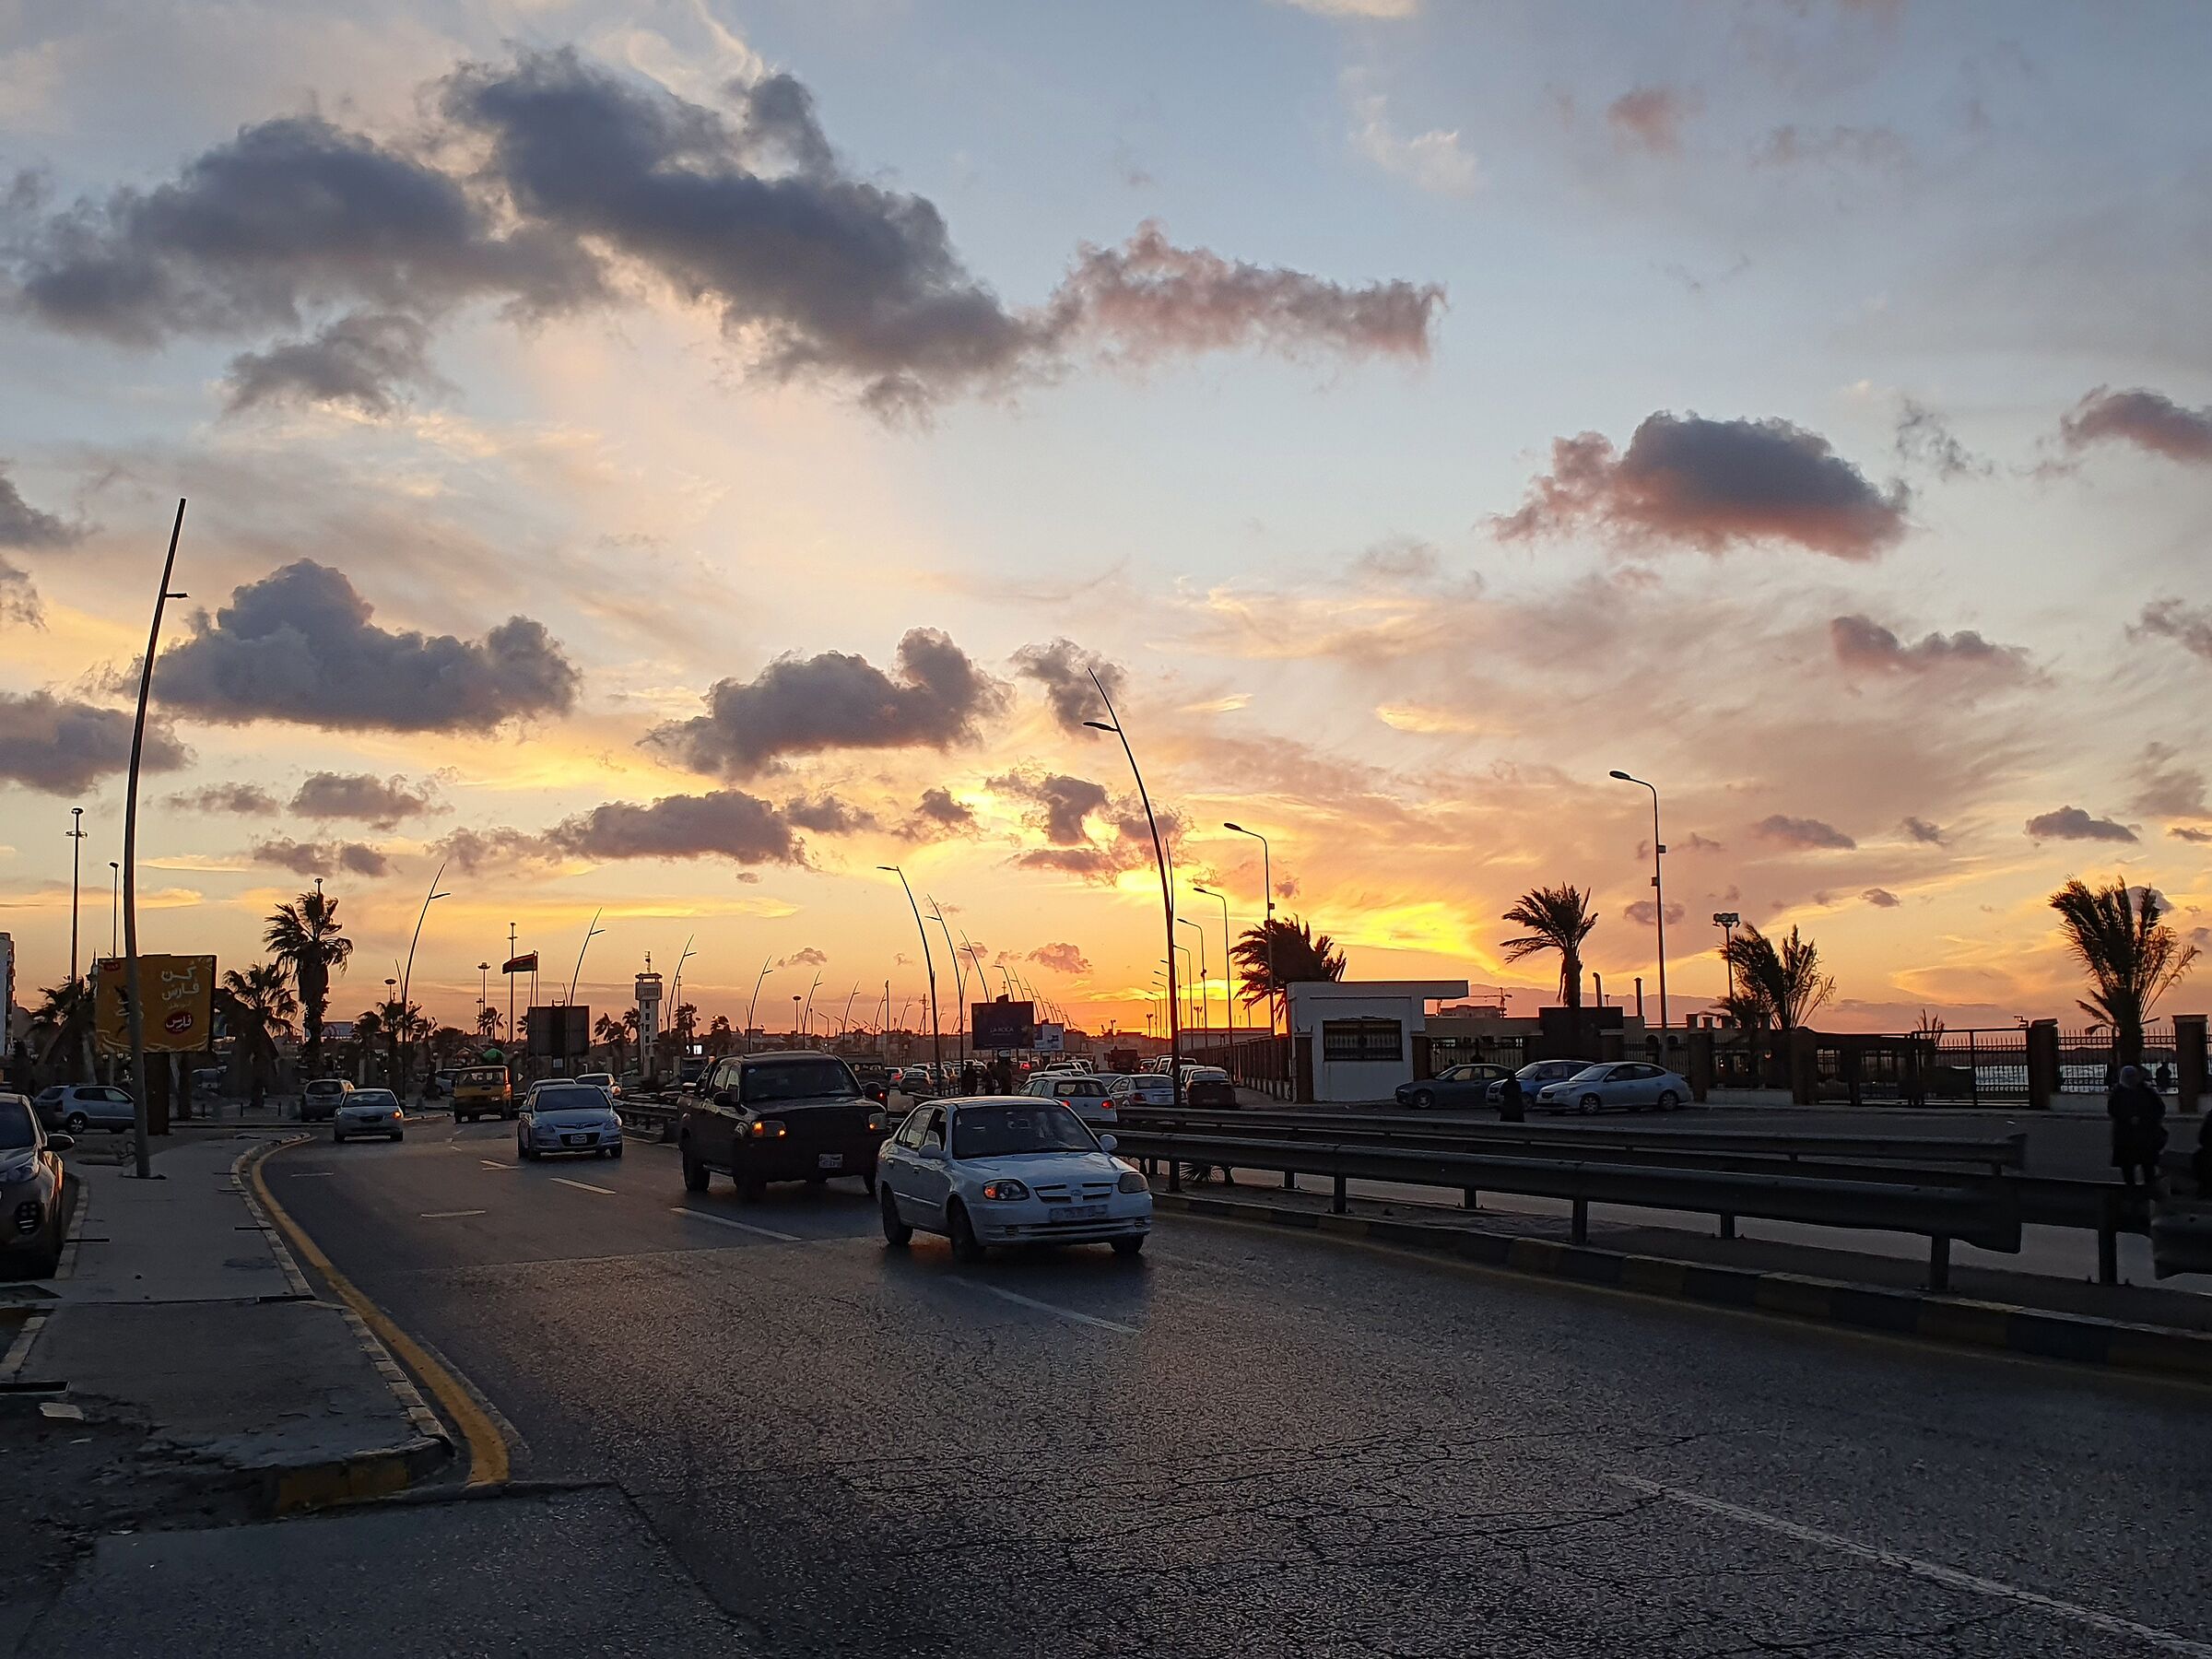 The sunset of Tripoli ...